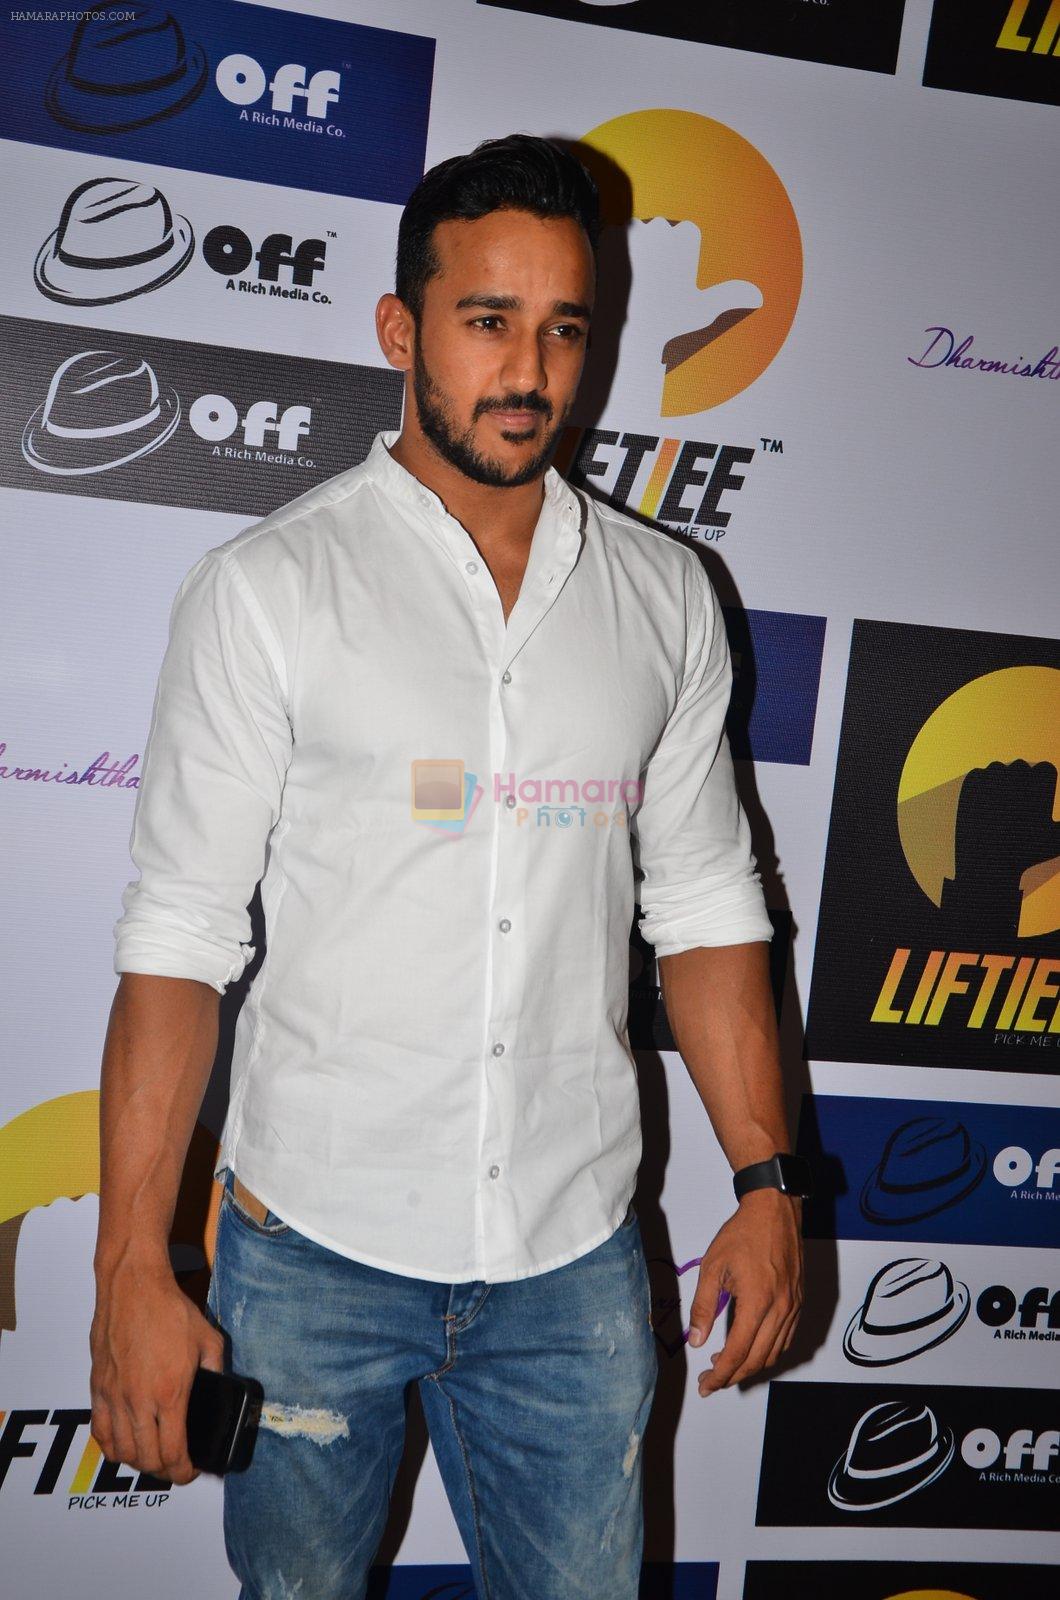 at Liftiee App Launch on 17th March 2016